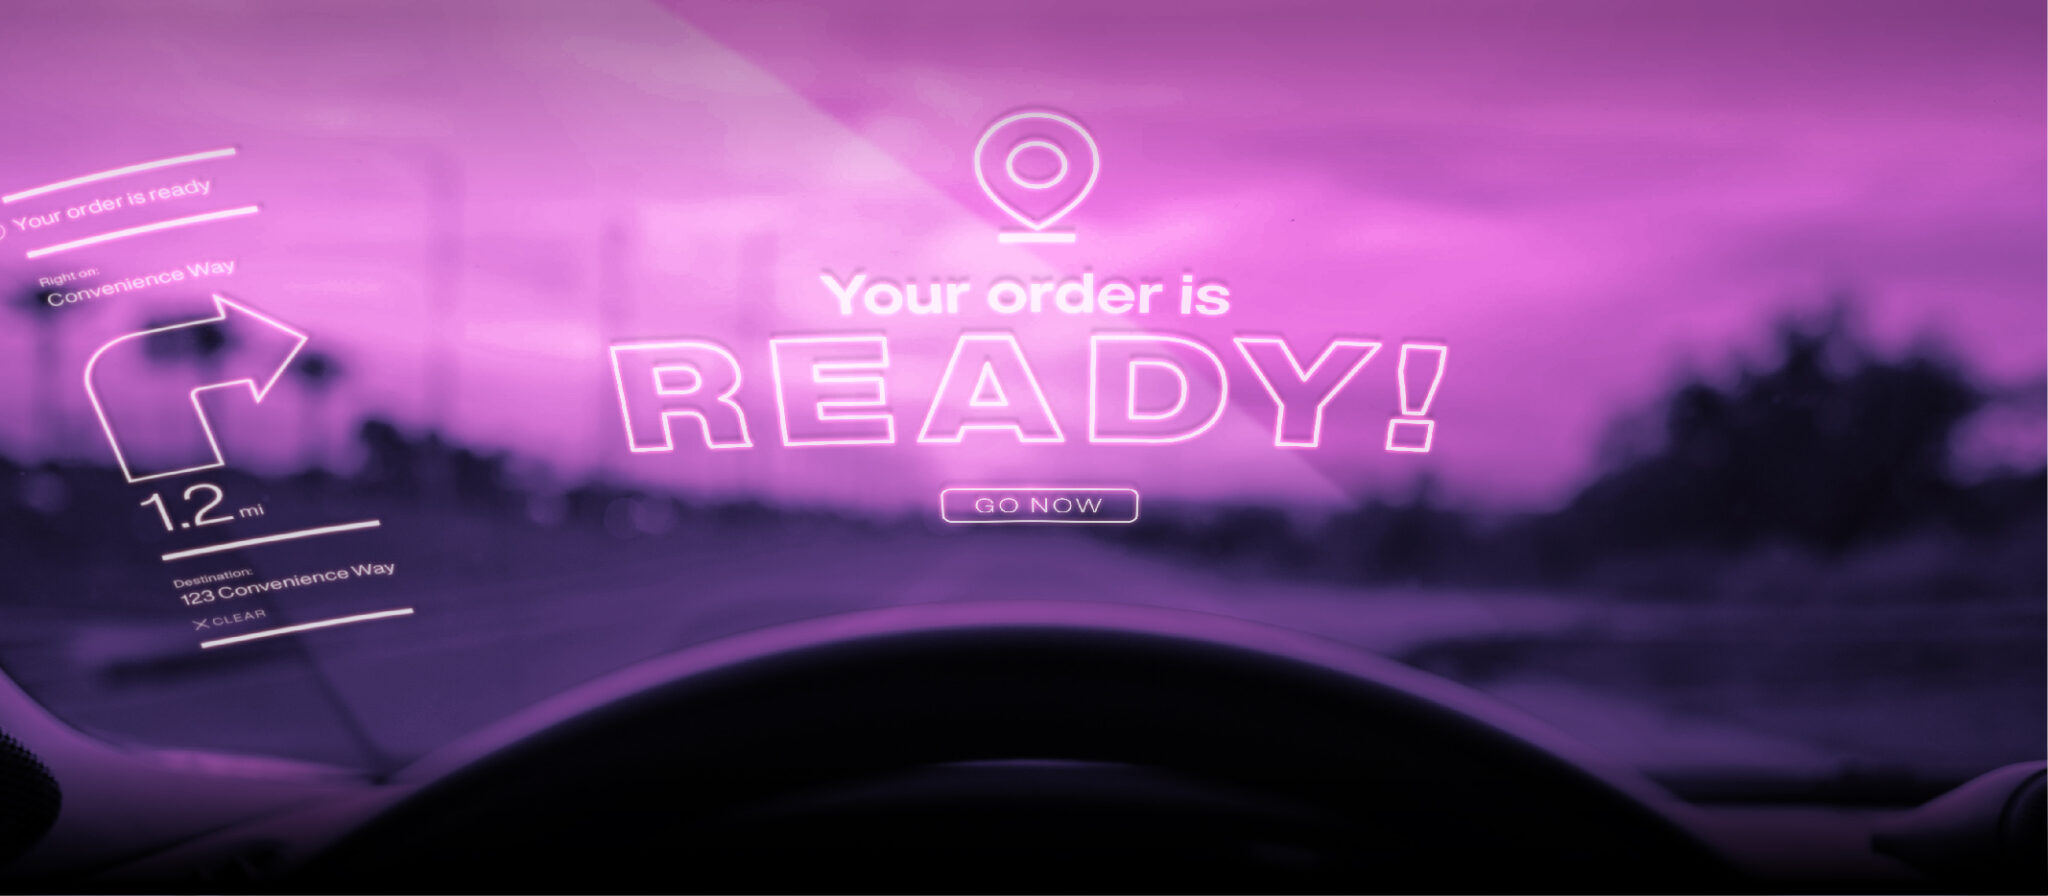 Car screen with notification saying 'Your order is ready'